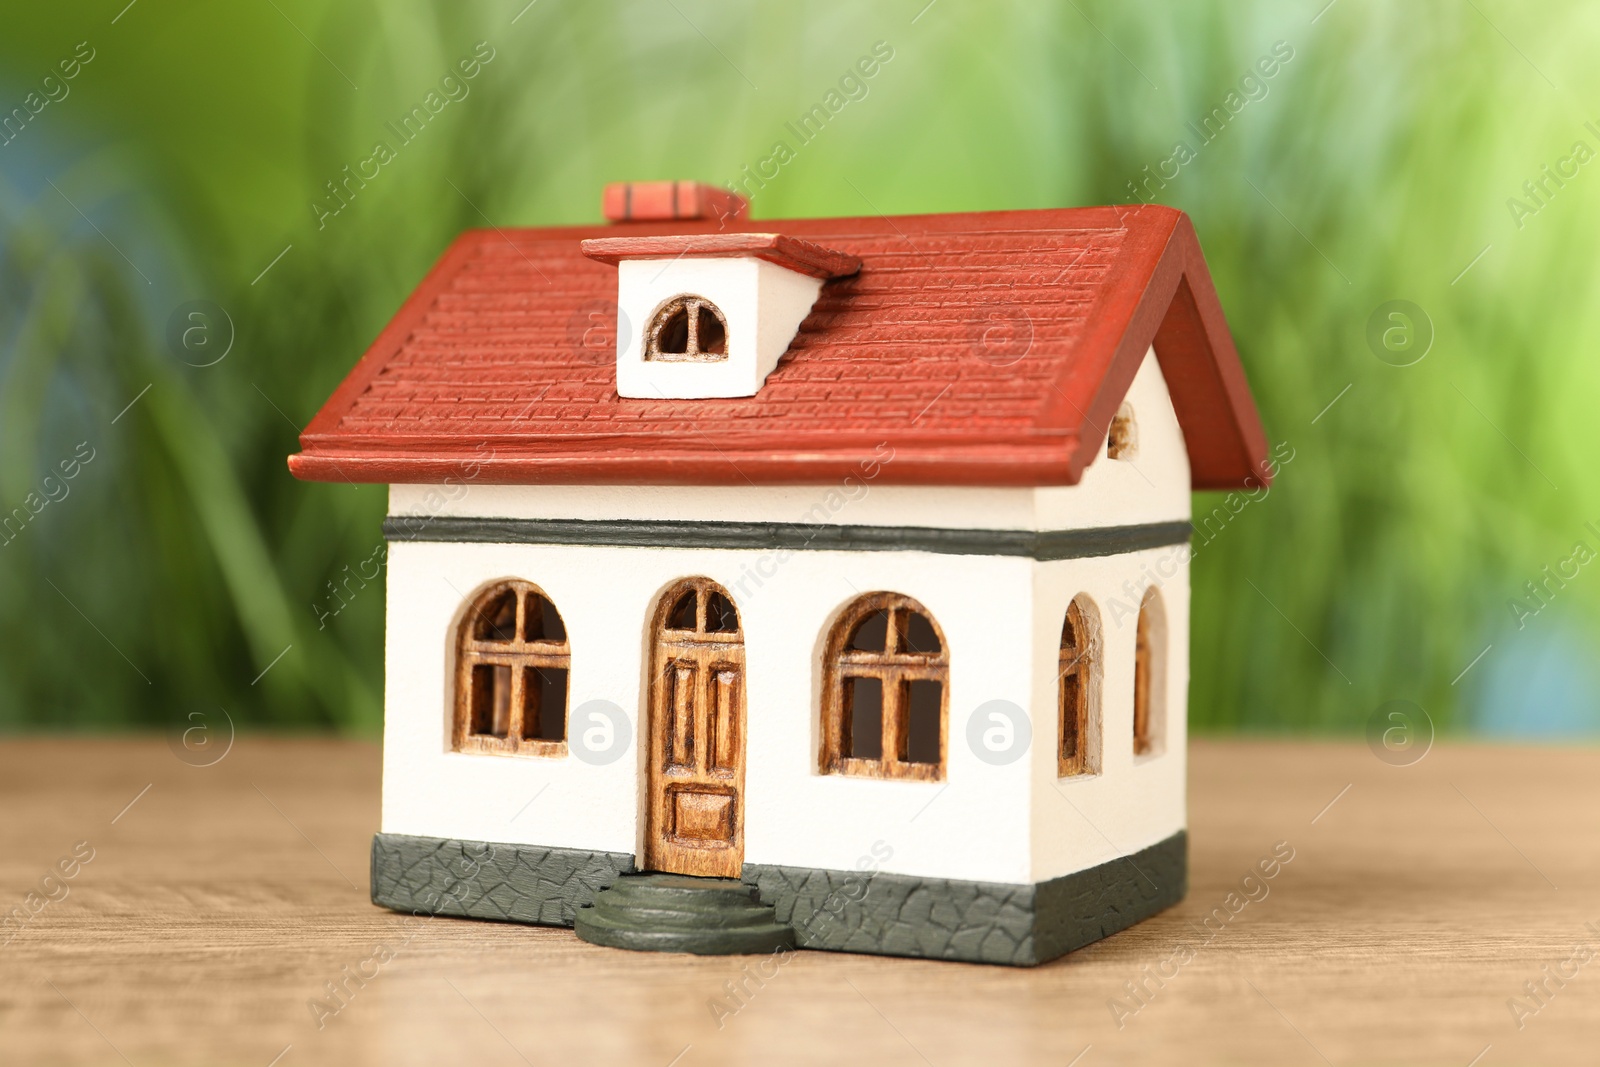 Photo of Mortgage concept. House model on wooden table against blurred green background